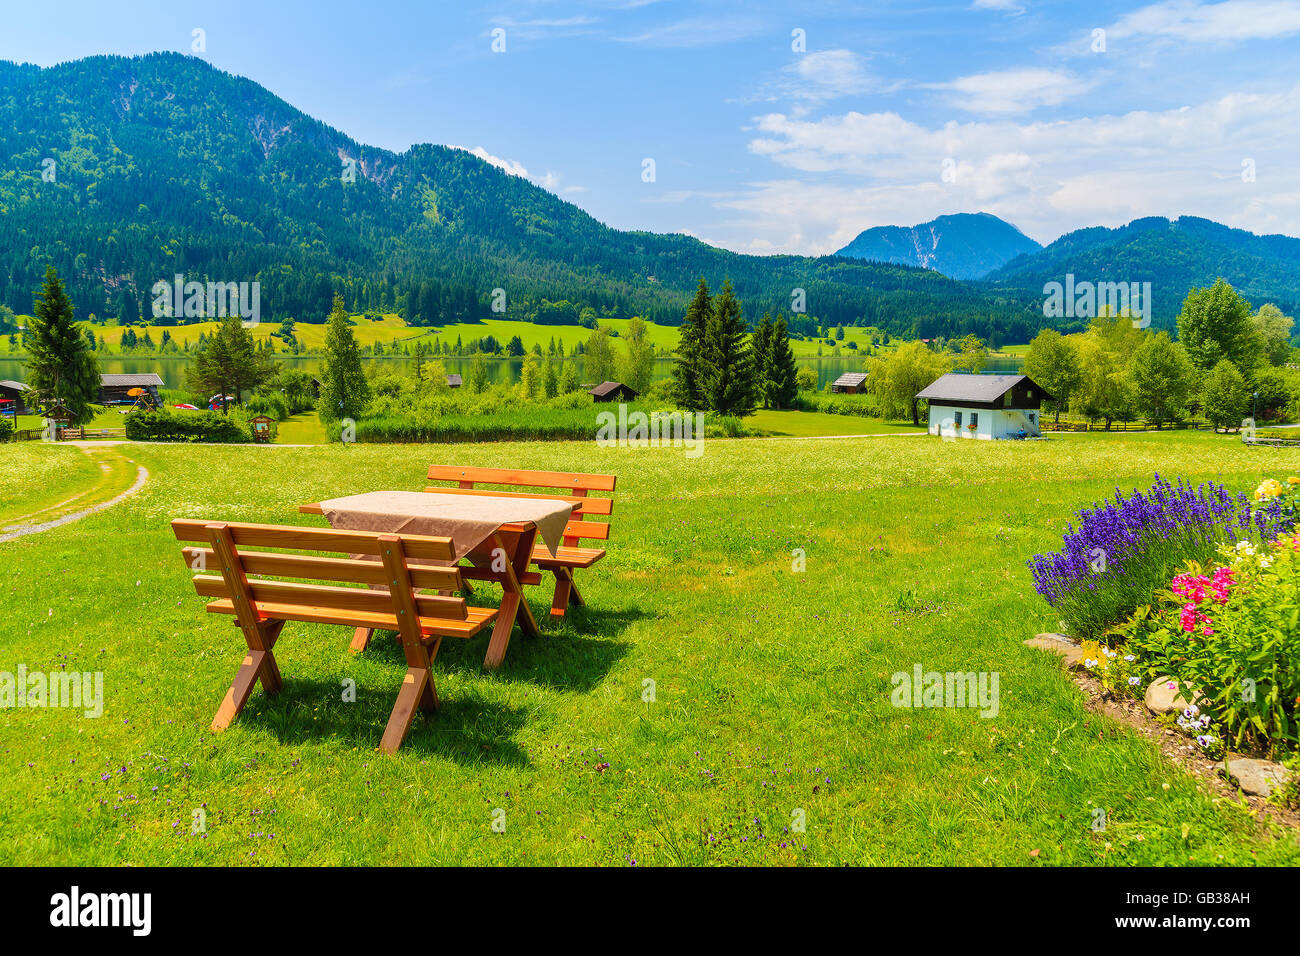 Benches with picnic table on green grass in alpine village on shore of Weissensee lake in summer landscape of Alps Mountains, Au Stock Photo